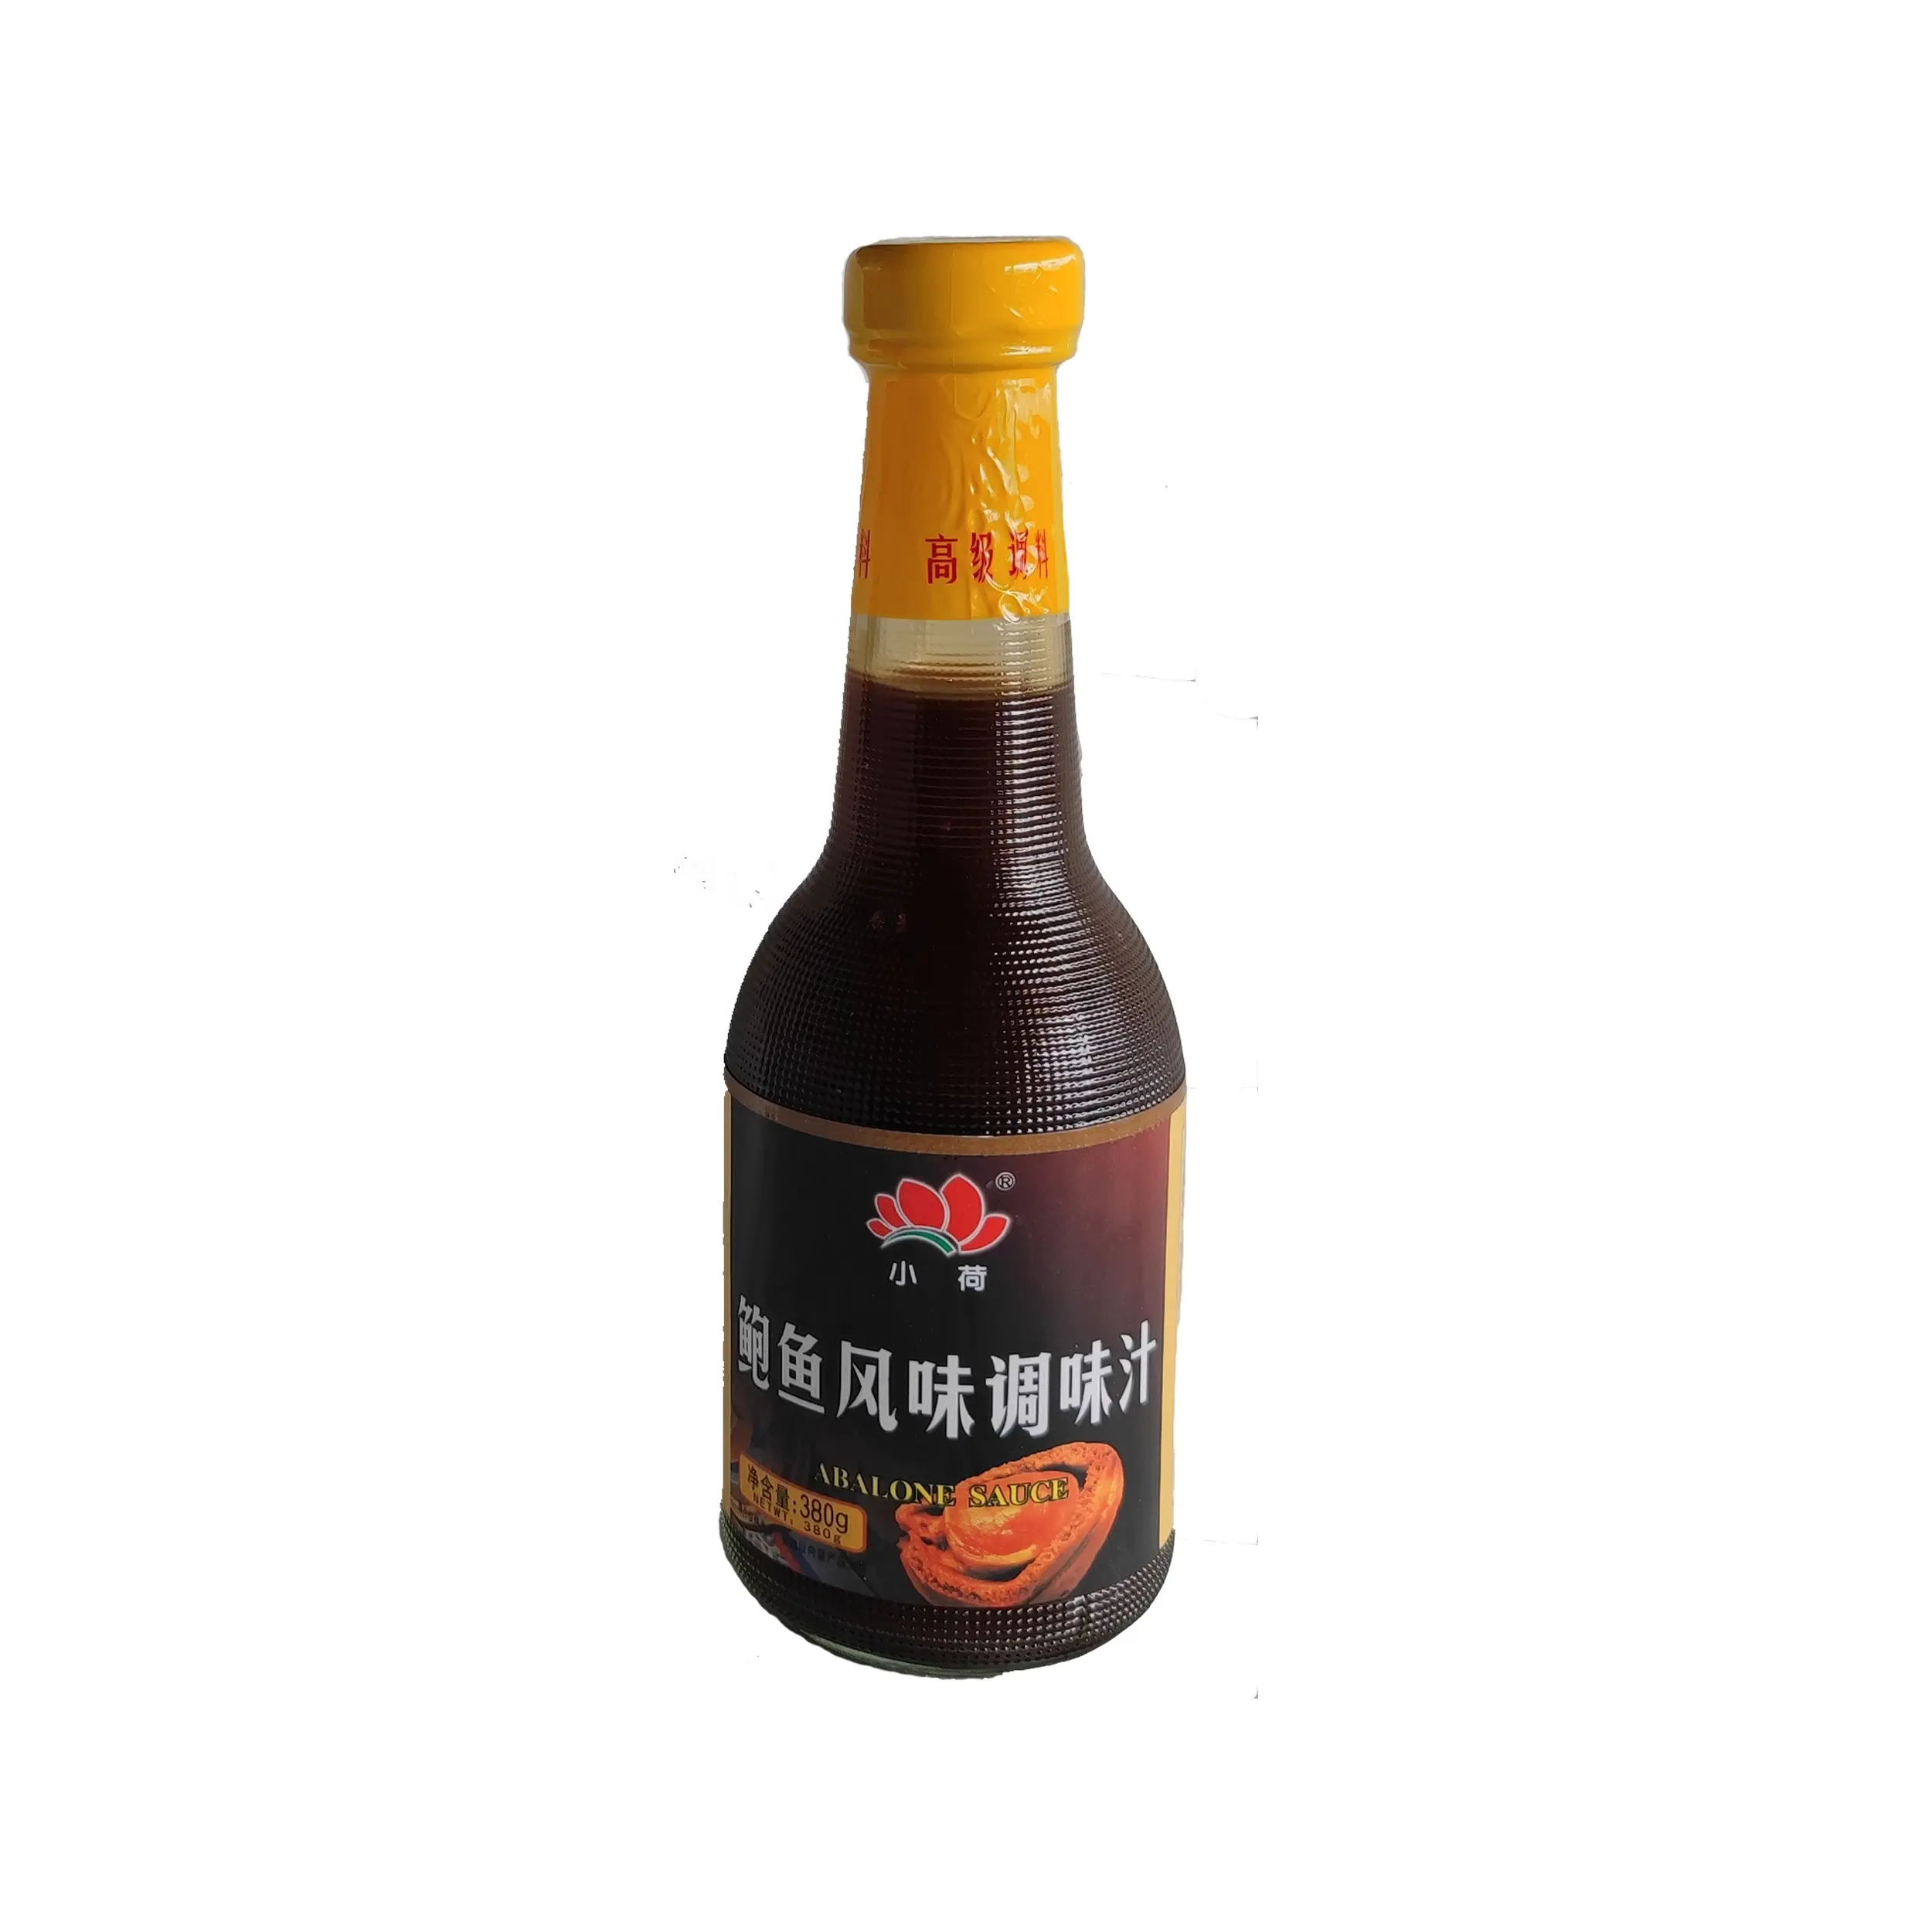 Abalone Sauce, Abalone flavor very good for cooking foods, superior quality with good taste